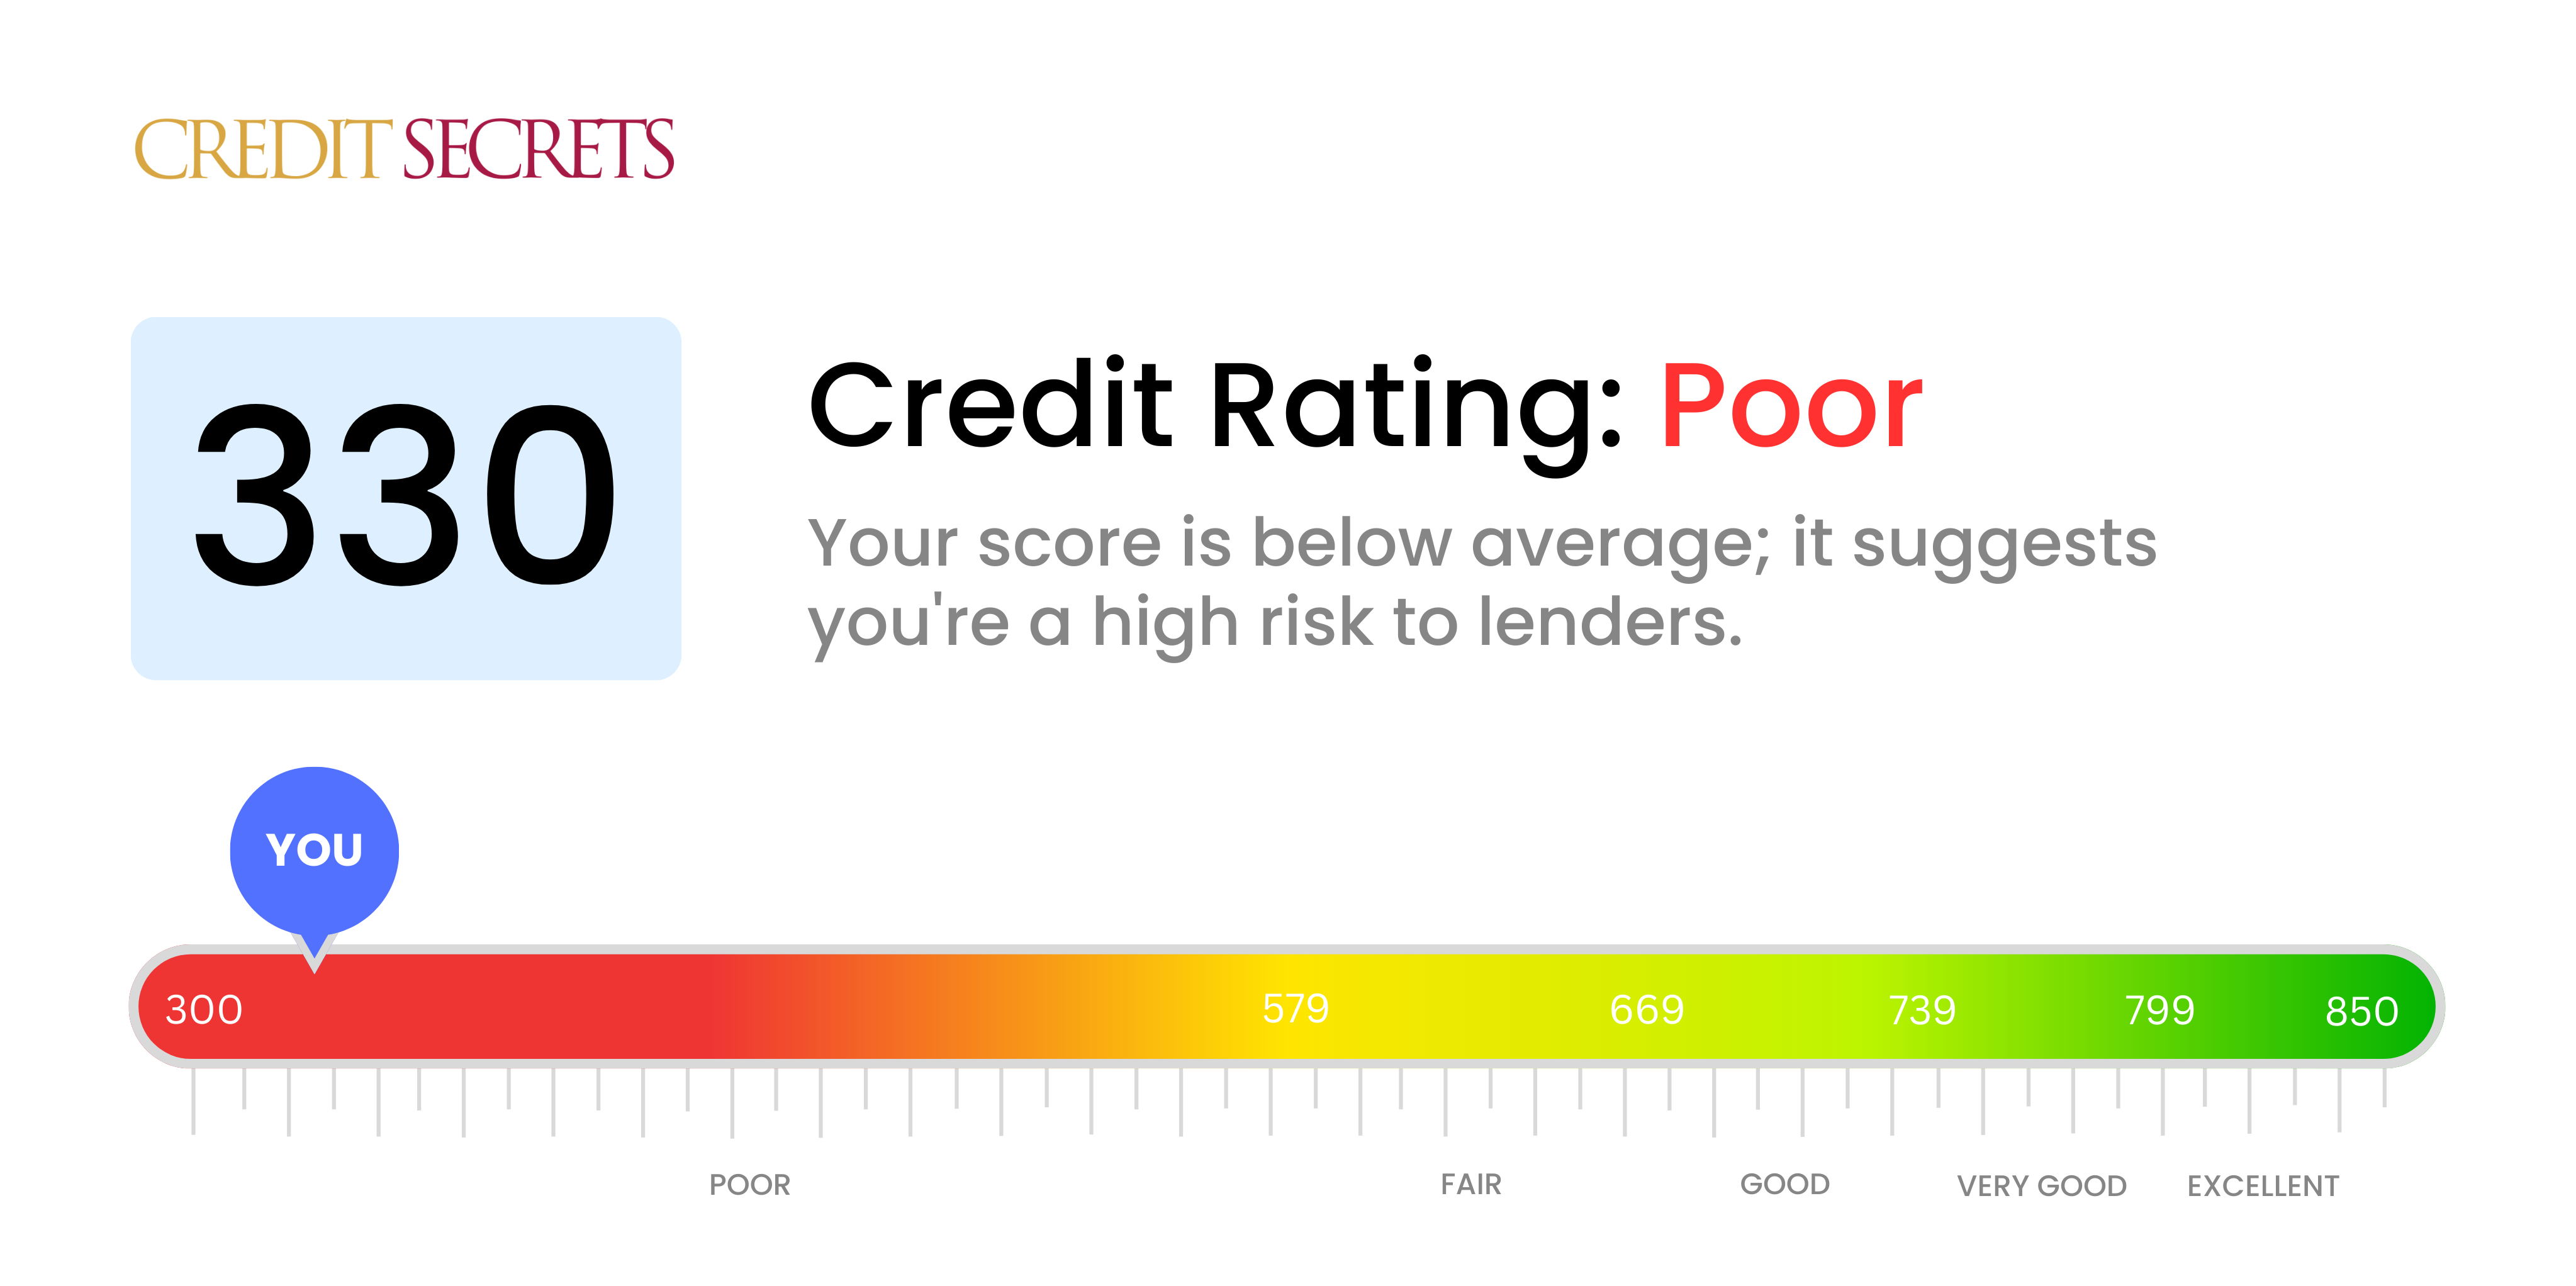 Is 330 a good credit score?